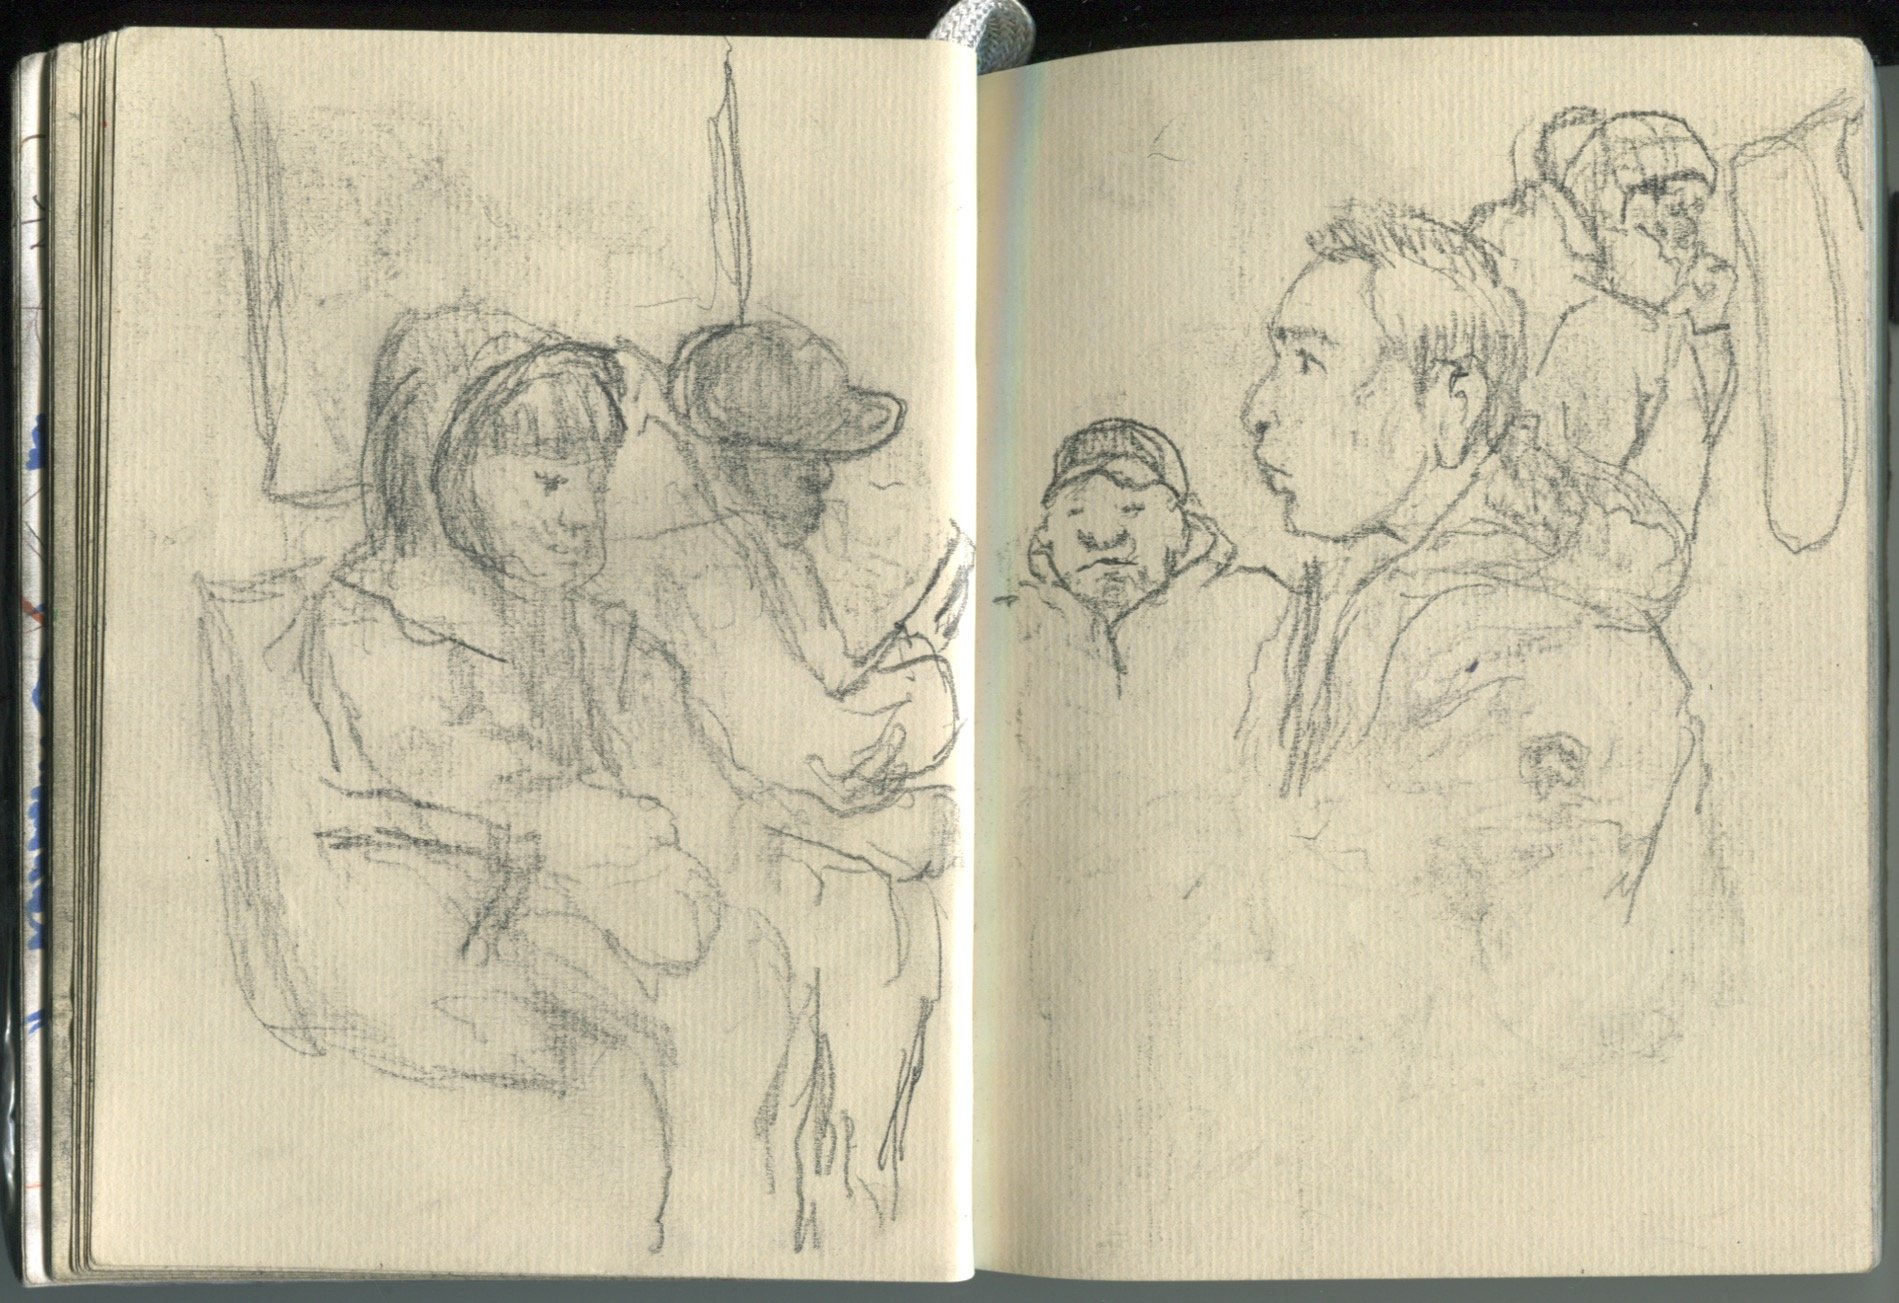  Early Pages from The Sketchbook,  